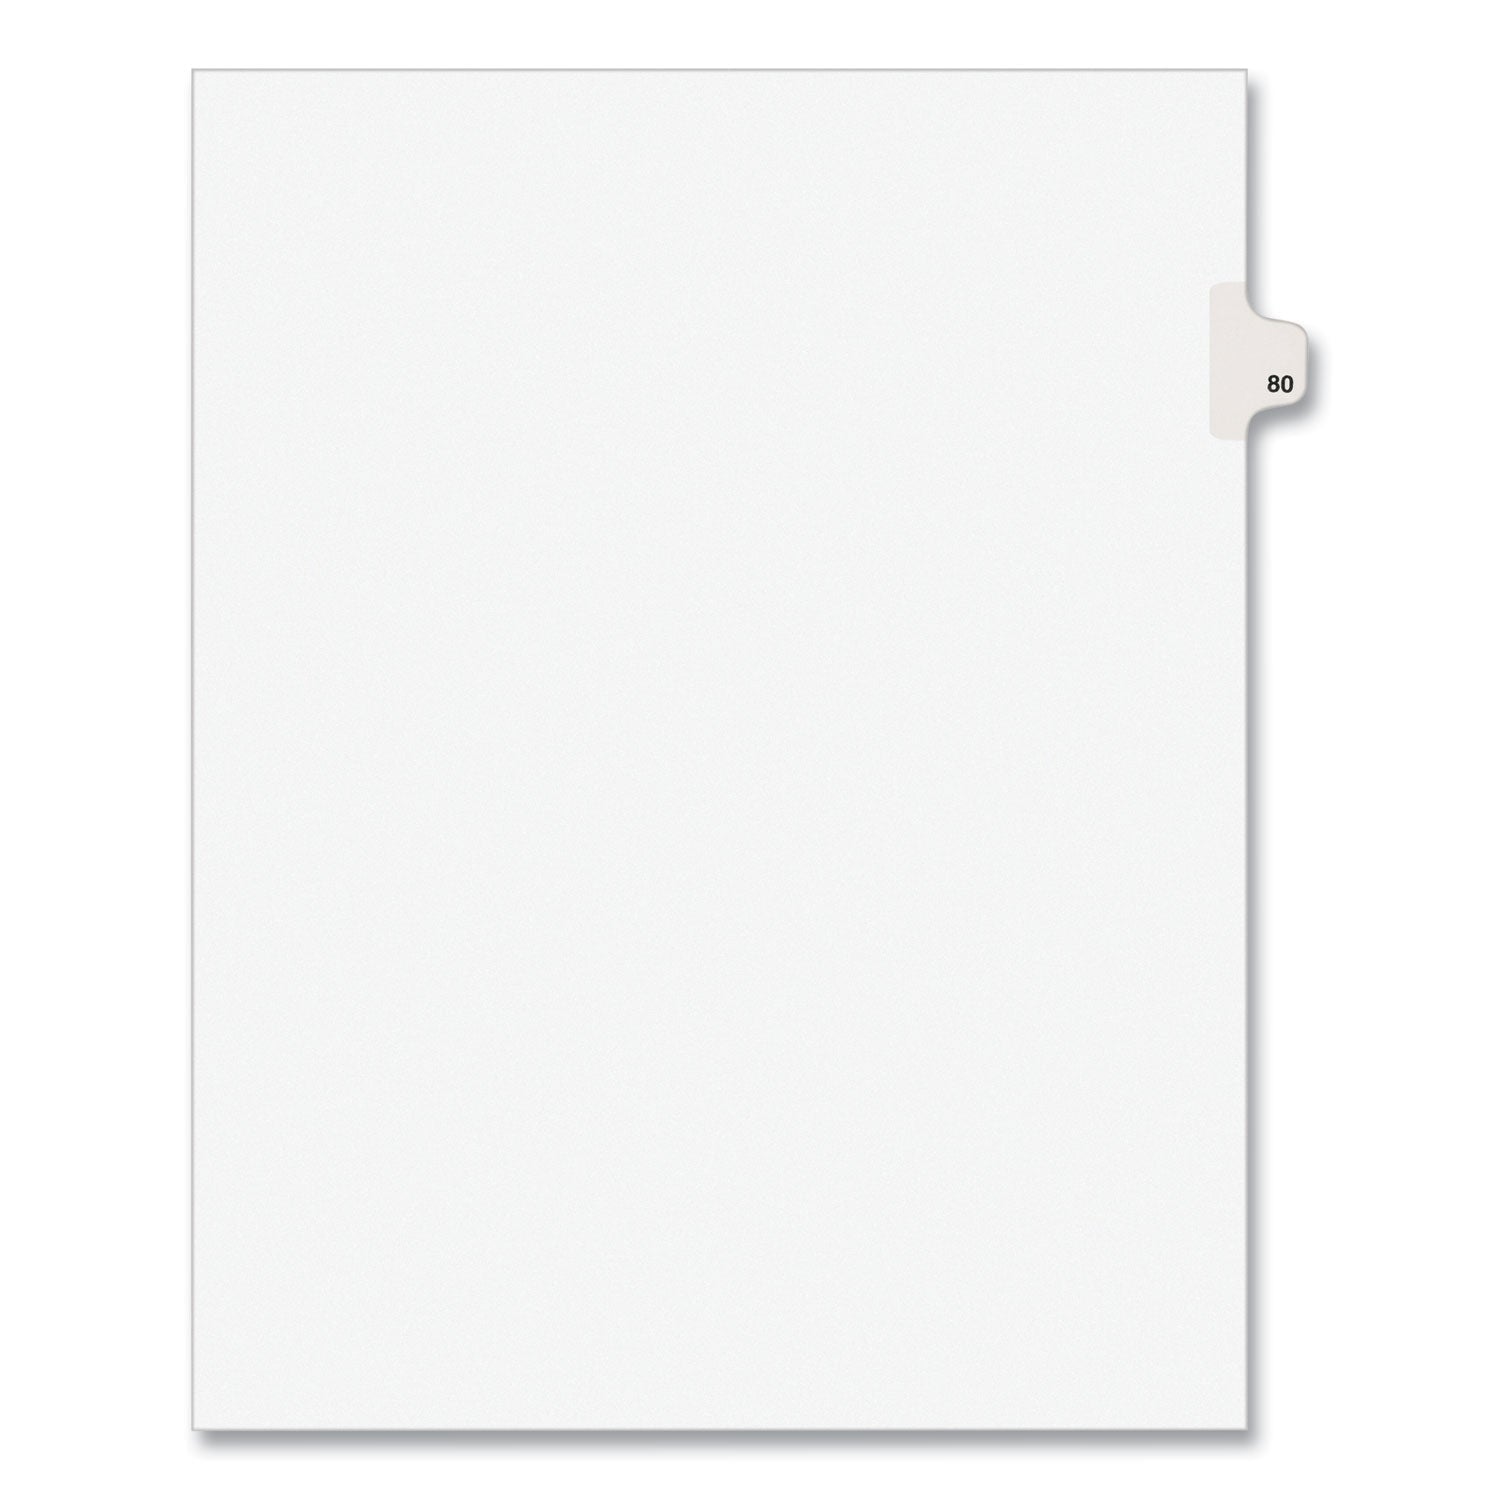 Preprinted Legal Exhibit Side Tab Index Dividers, Avery Style, 10-Tab, 80, 11 x 8.5, White, 25/Pack, (1080) - 